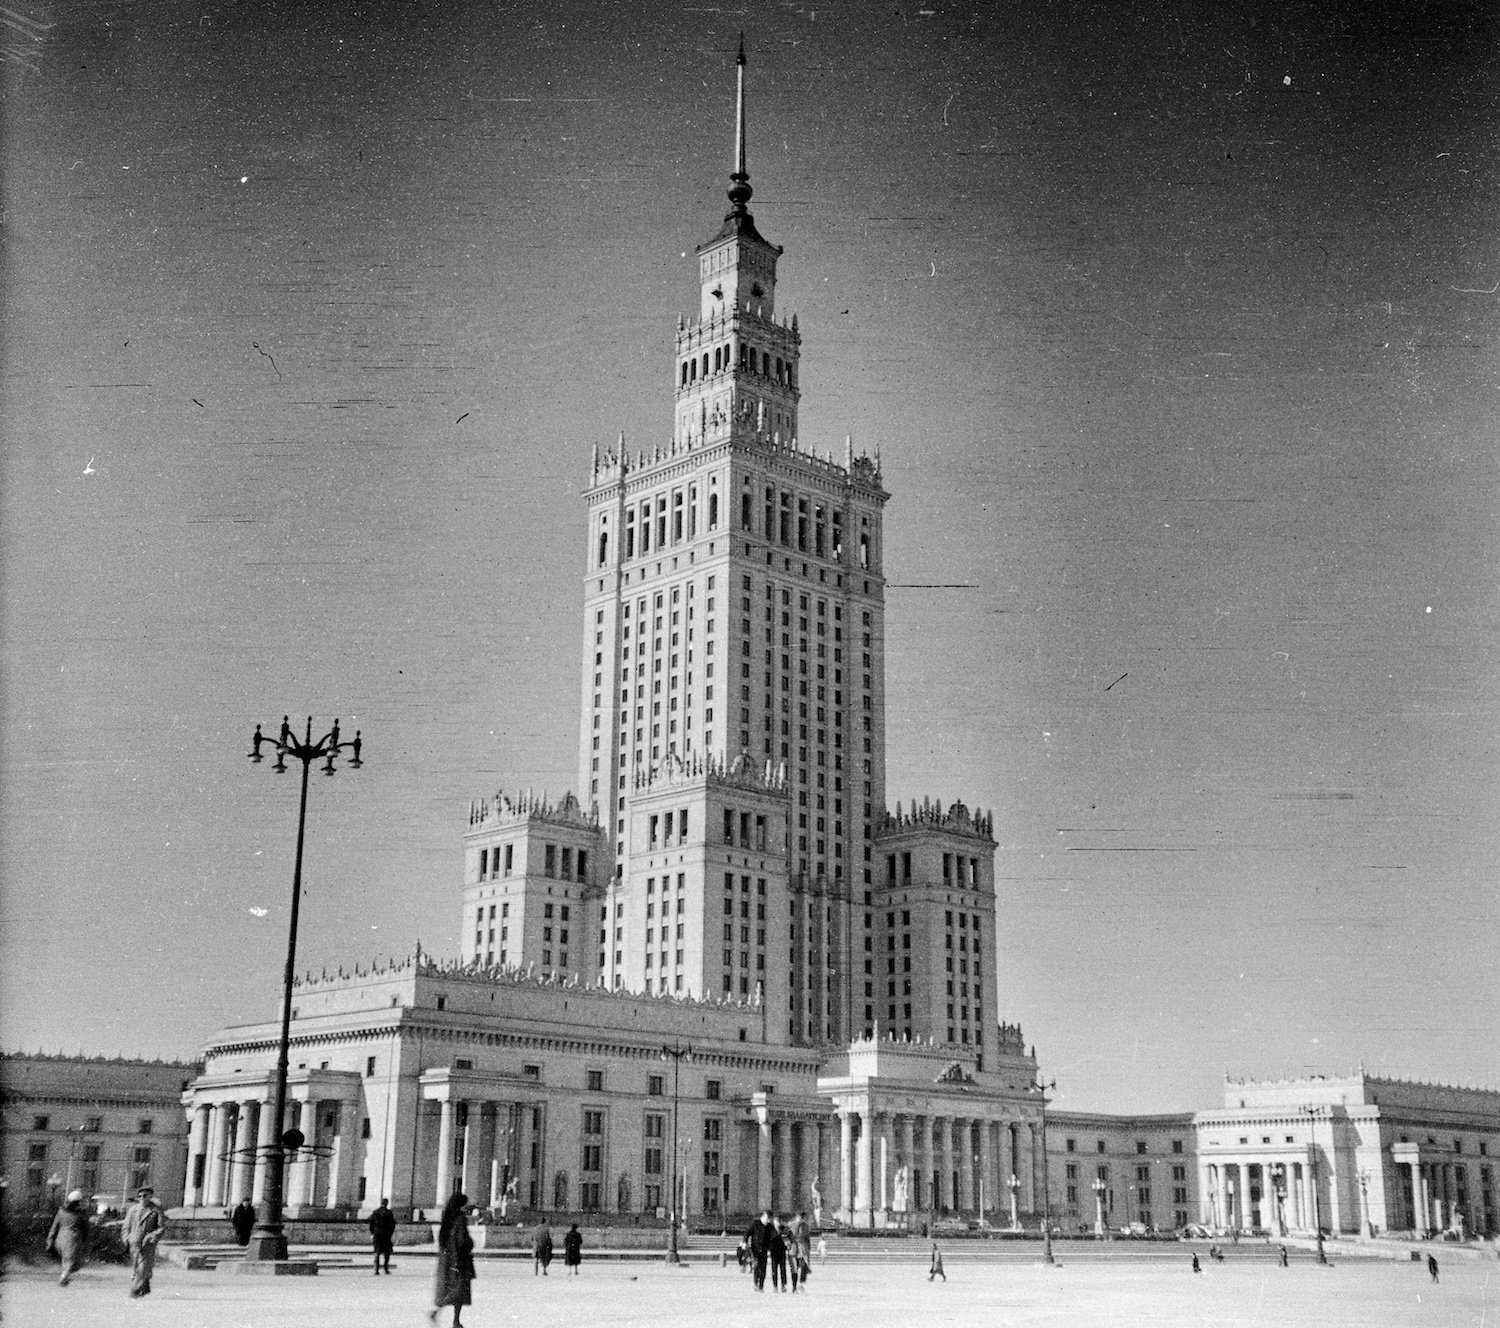 The completed Palace in 1960. Image: FORTEPAN/Romák_Éva under a CC licence